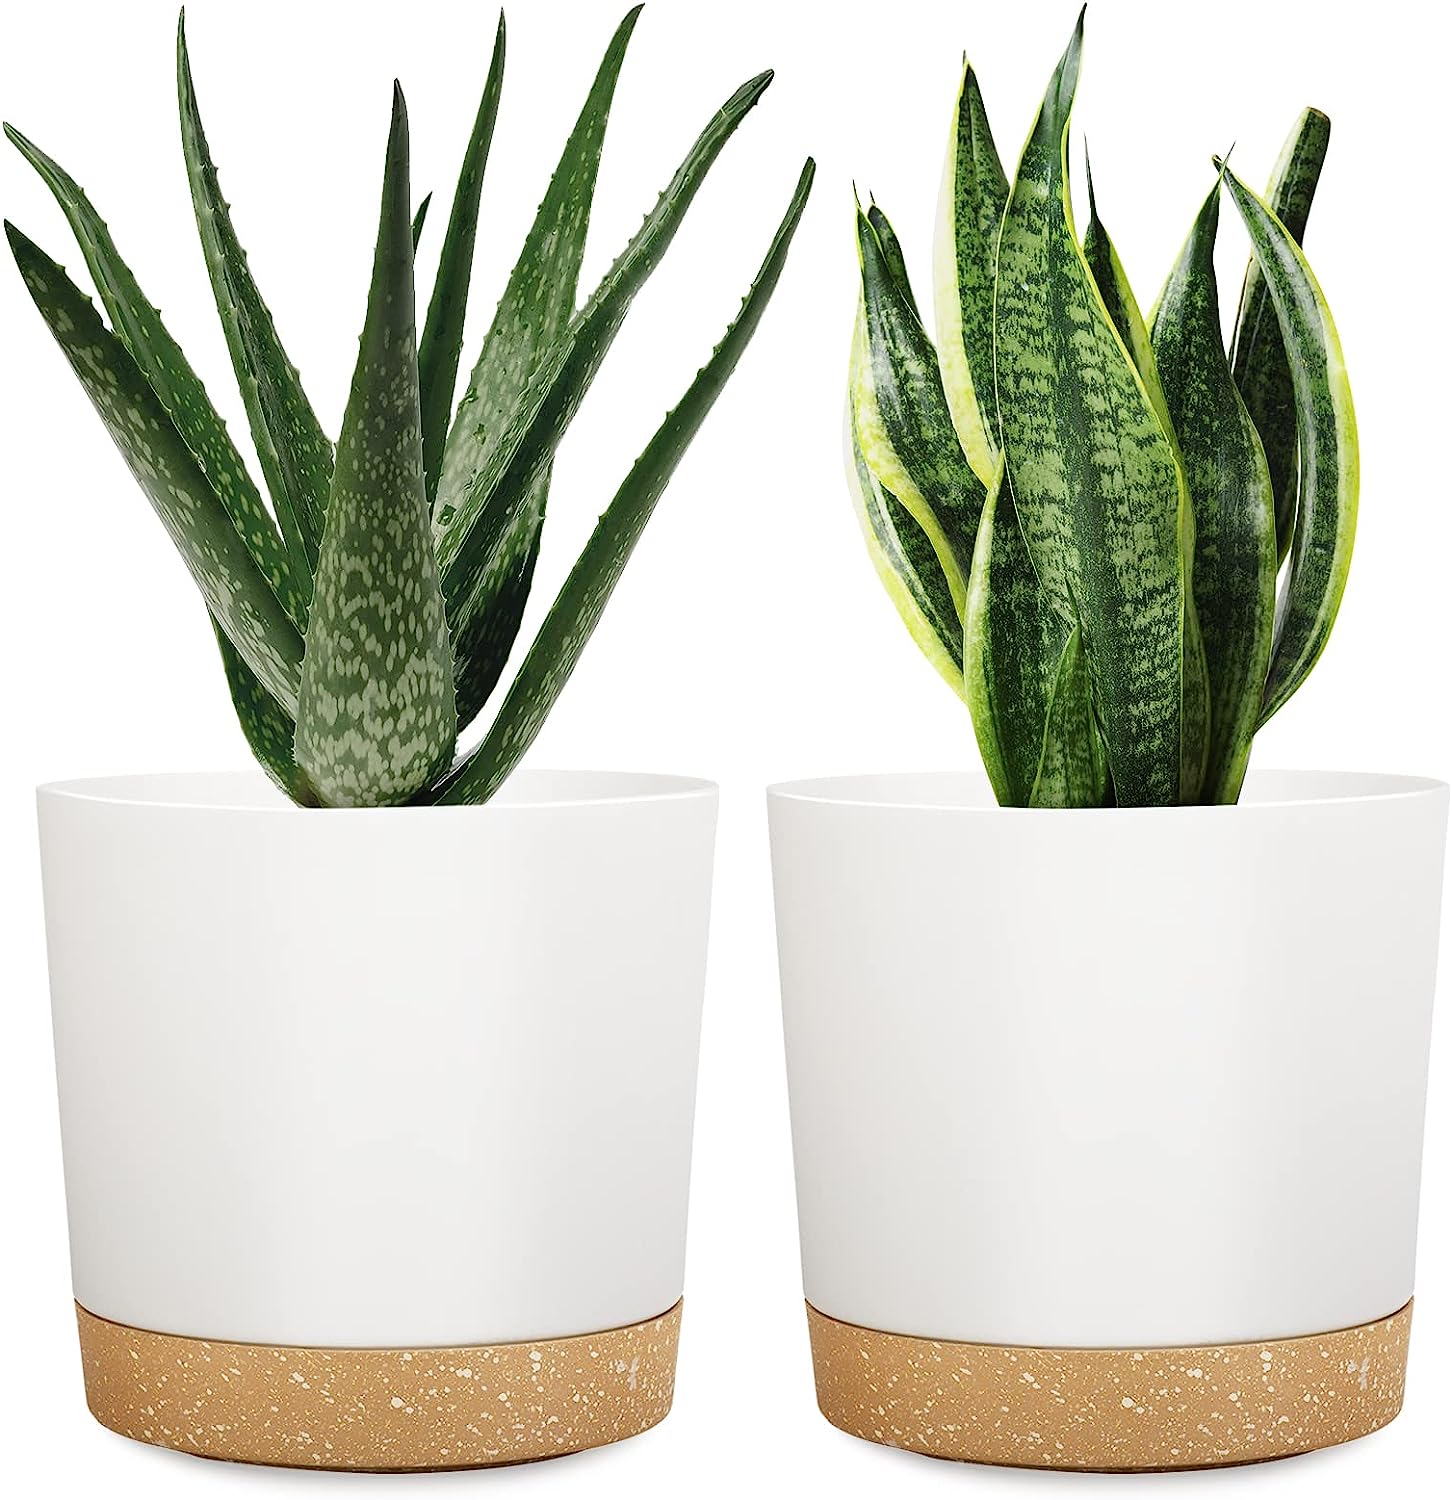 DEMACIYA 8 Inch Plant Pots, 2Pack Planters for Indoor [...]